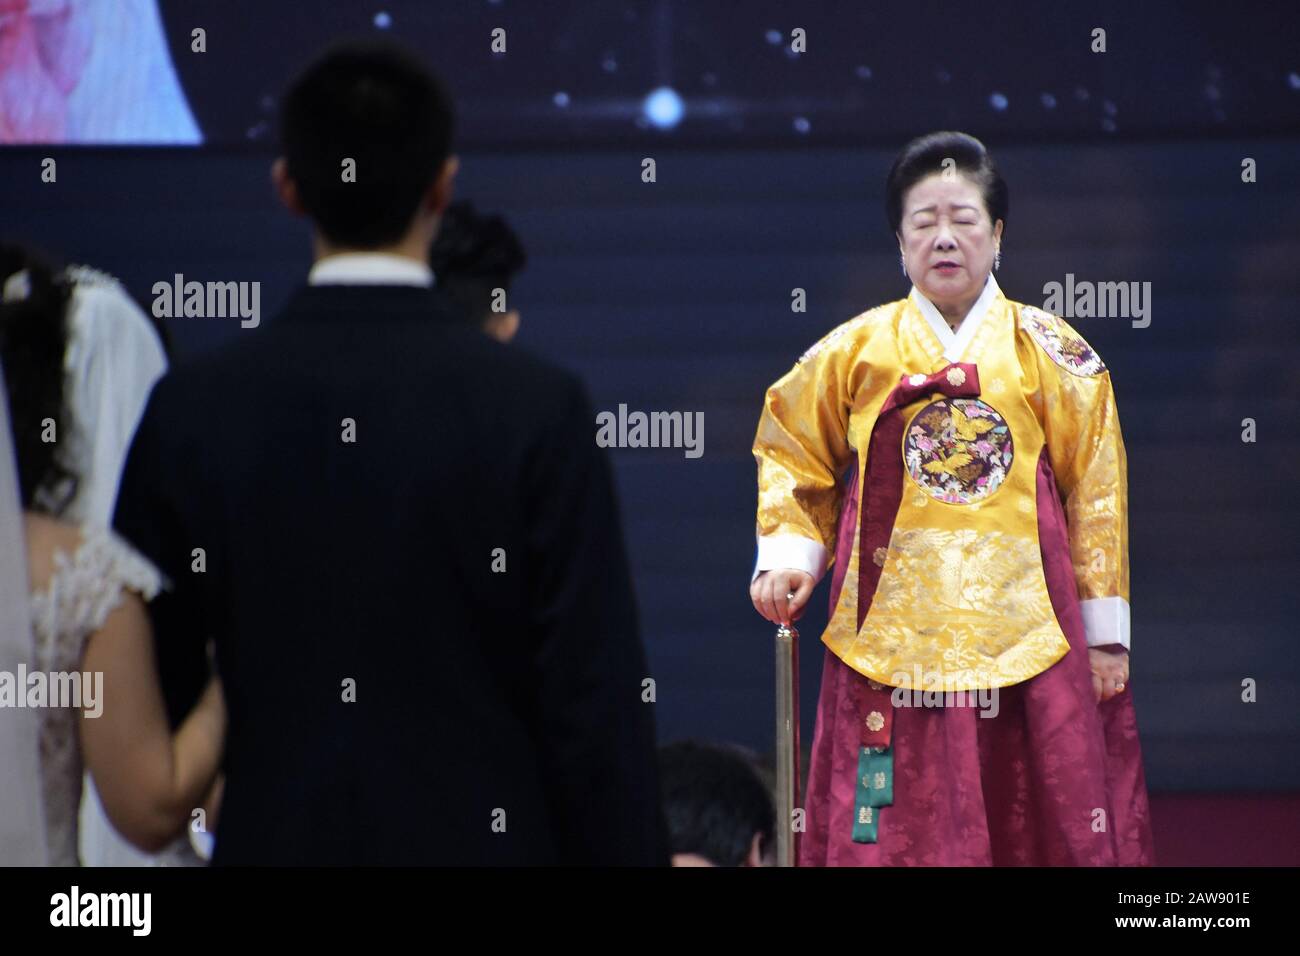 Gapyeong, South Korea. 07th Feb, 2020. Han Hak-ja, wife of late Unification Church founder Moon Sun-myung prays during the Blessing Ceremony of the Family Federation for World Peace and Unification at the CheongShim Peace World Center in Gapyeong, South Korea, on Friday, February 7, 2020. Photo by Keizo Mori/UPI Credit: UPI/Alamy Live News Stock Photo